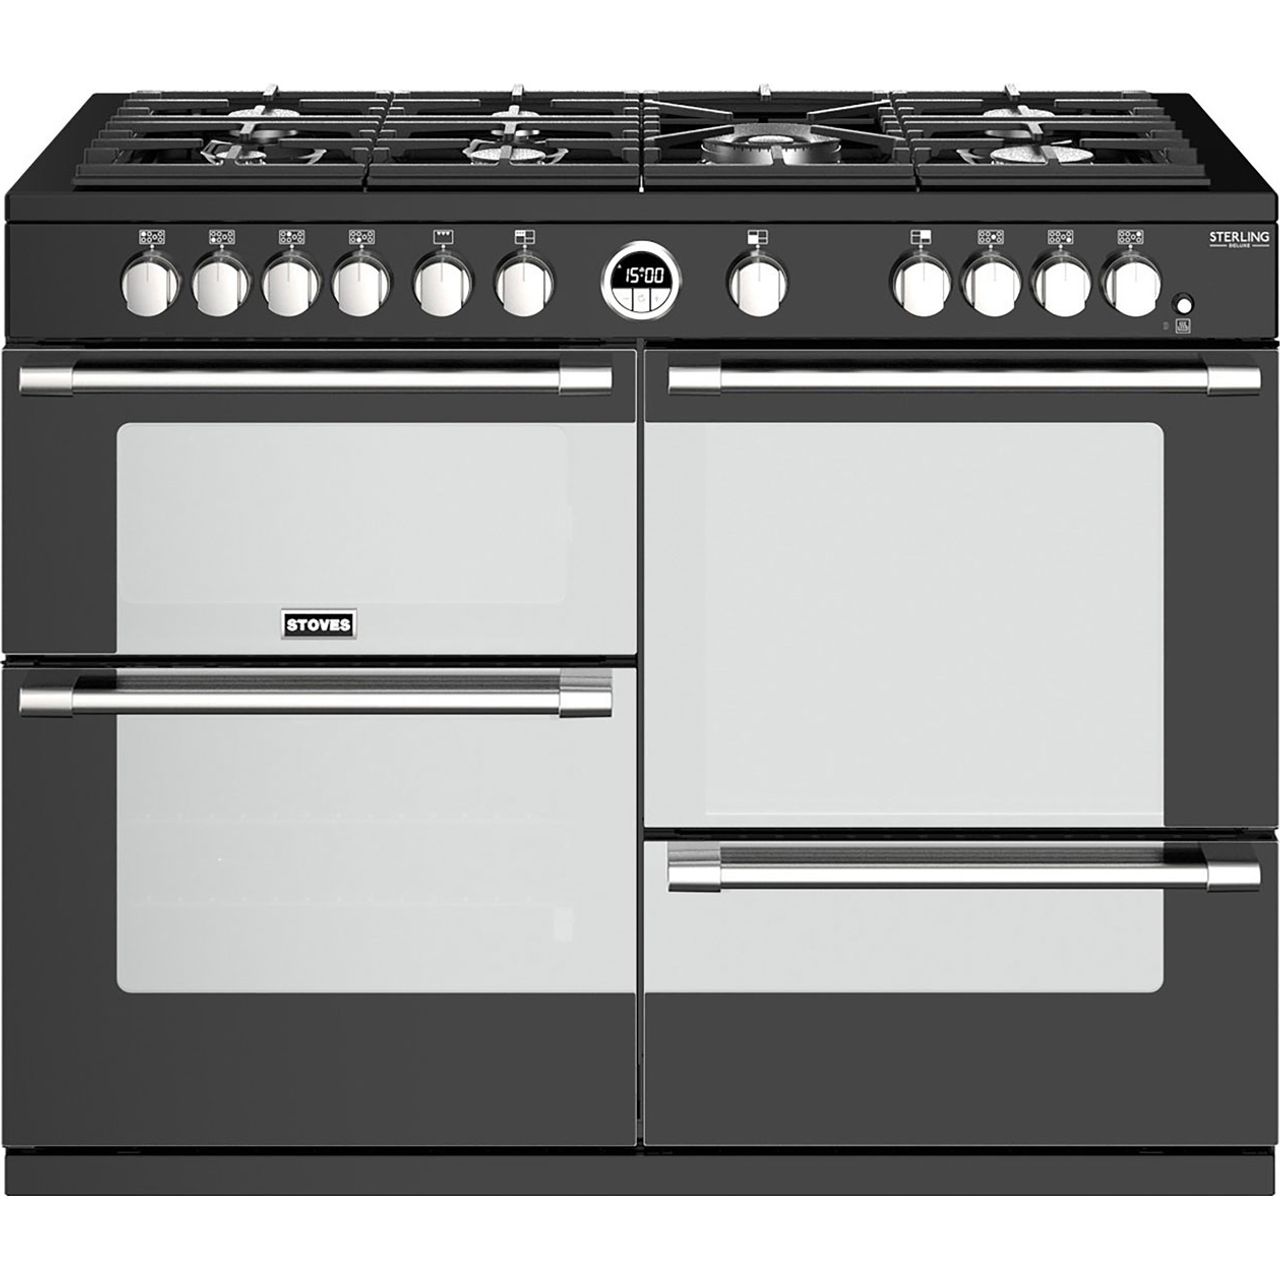 Stoves Sterling Deluxe S1100G 110cm Gas Range Cooker with Electric Grill Review